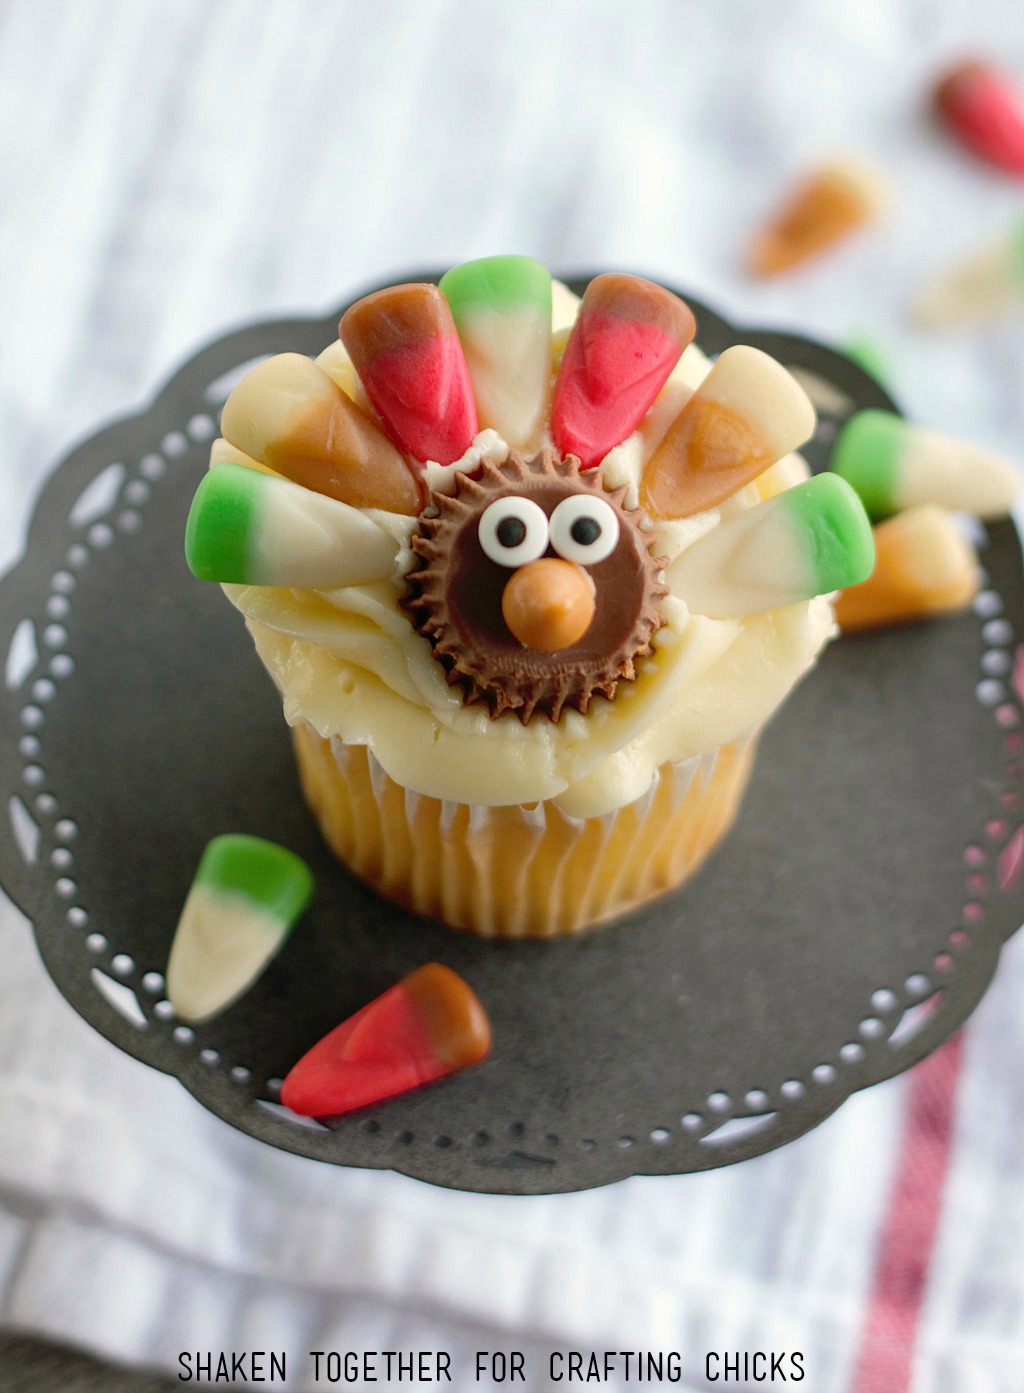 Could these Candy Corn Turkey Thanksgiving Cupcakes be any cuter?! I love that sweet face and the colorful candy corn feathers. This is a great way to use up leftover Halloween candy, too!